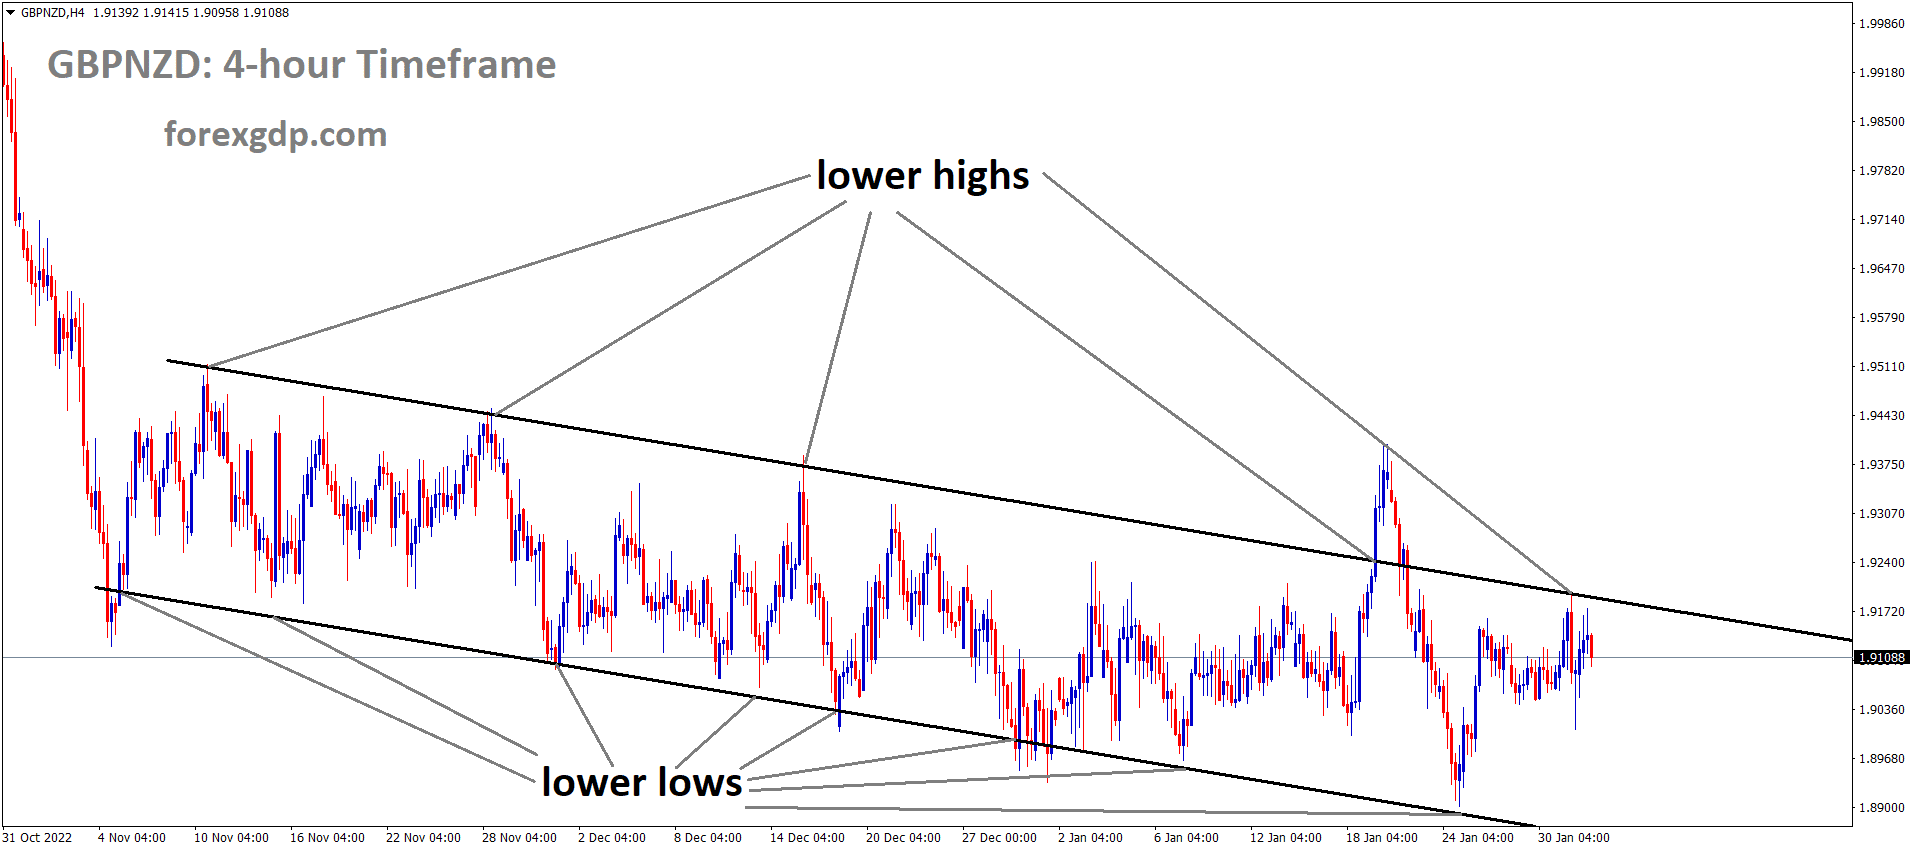 GBPNZD is moving in the Descending channel and the market has fallen from the lower high area of the channel